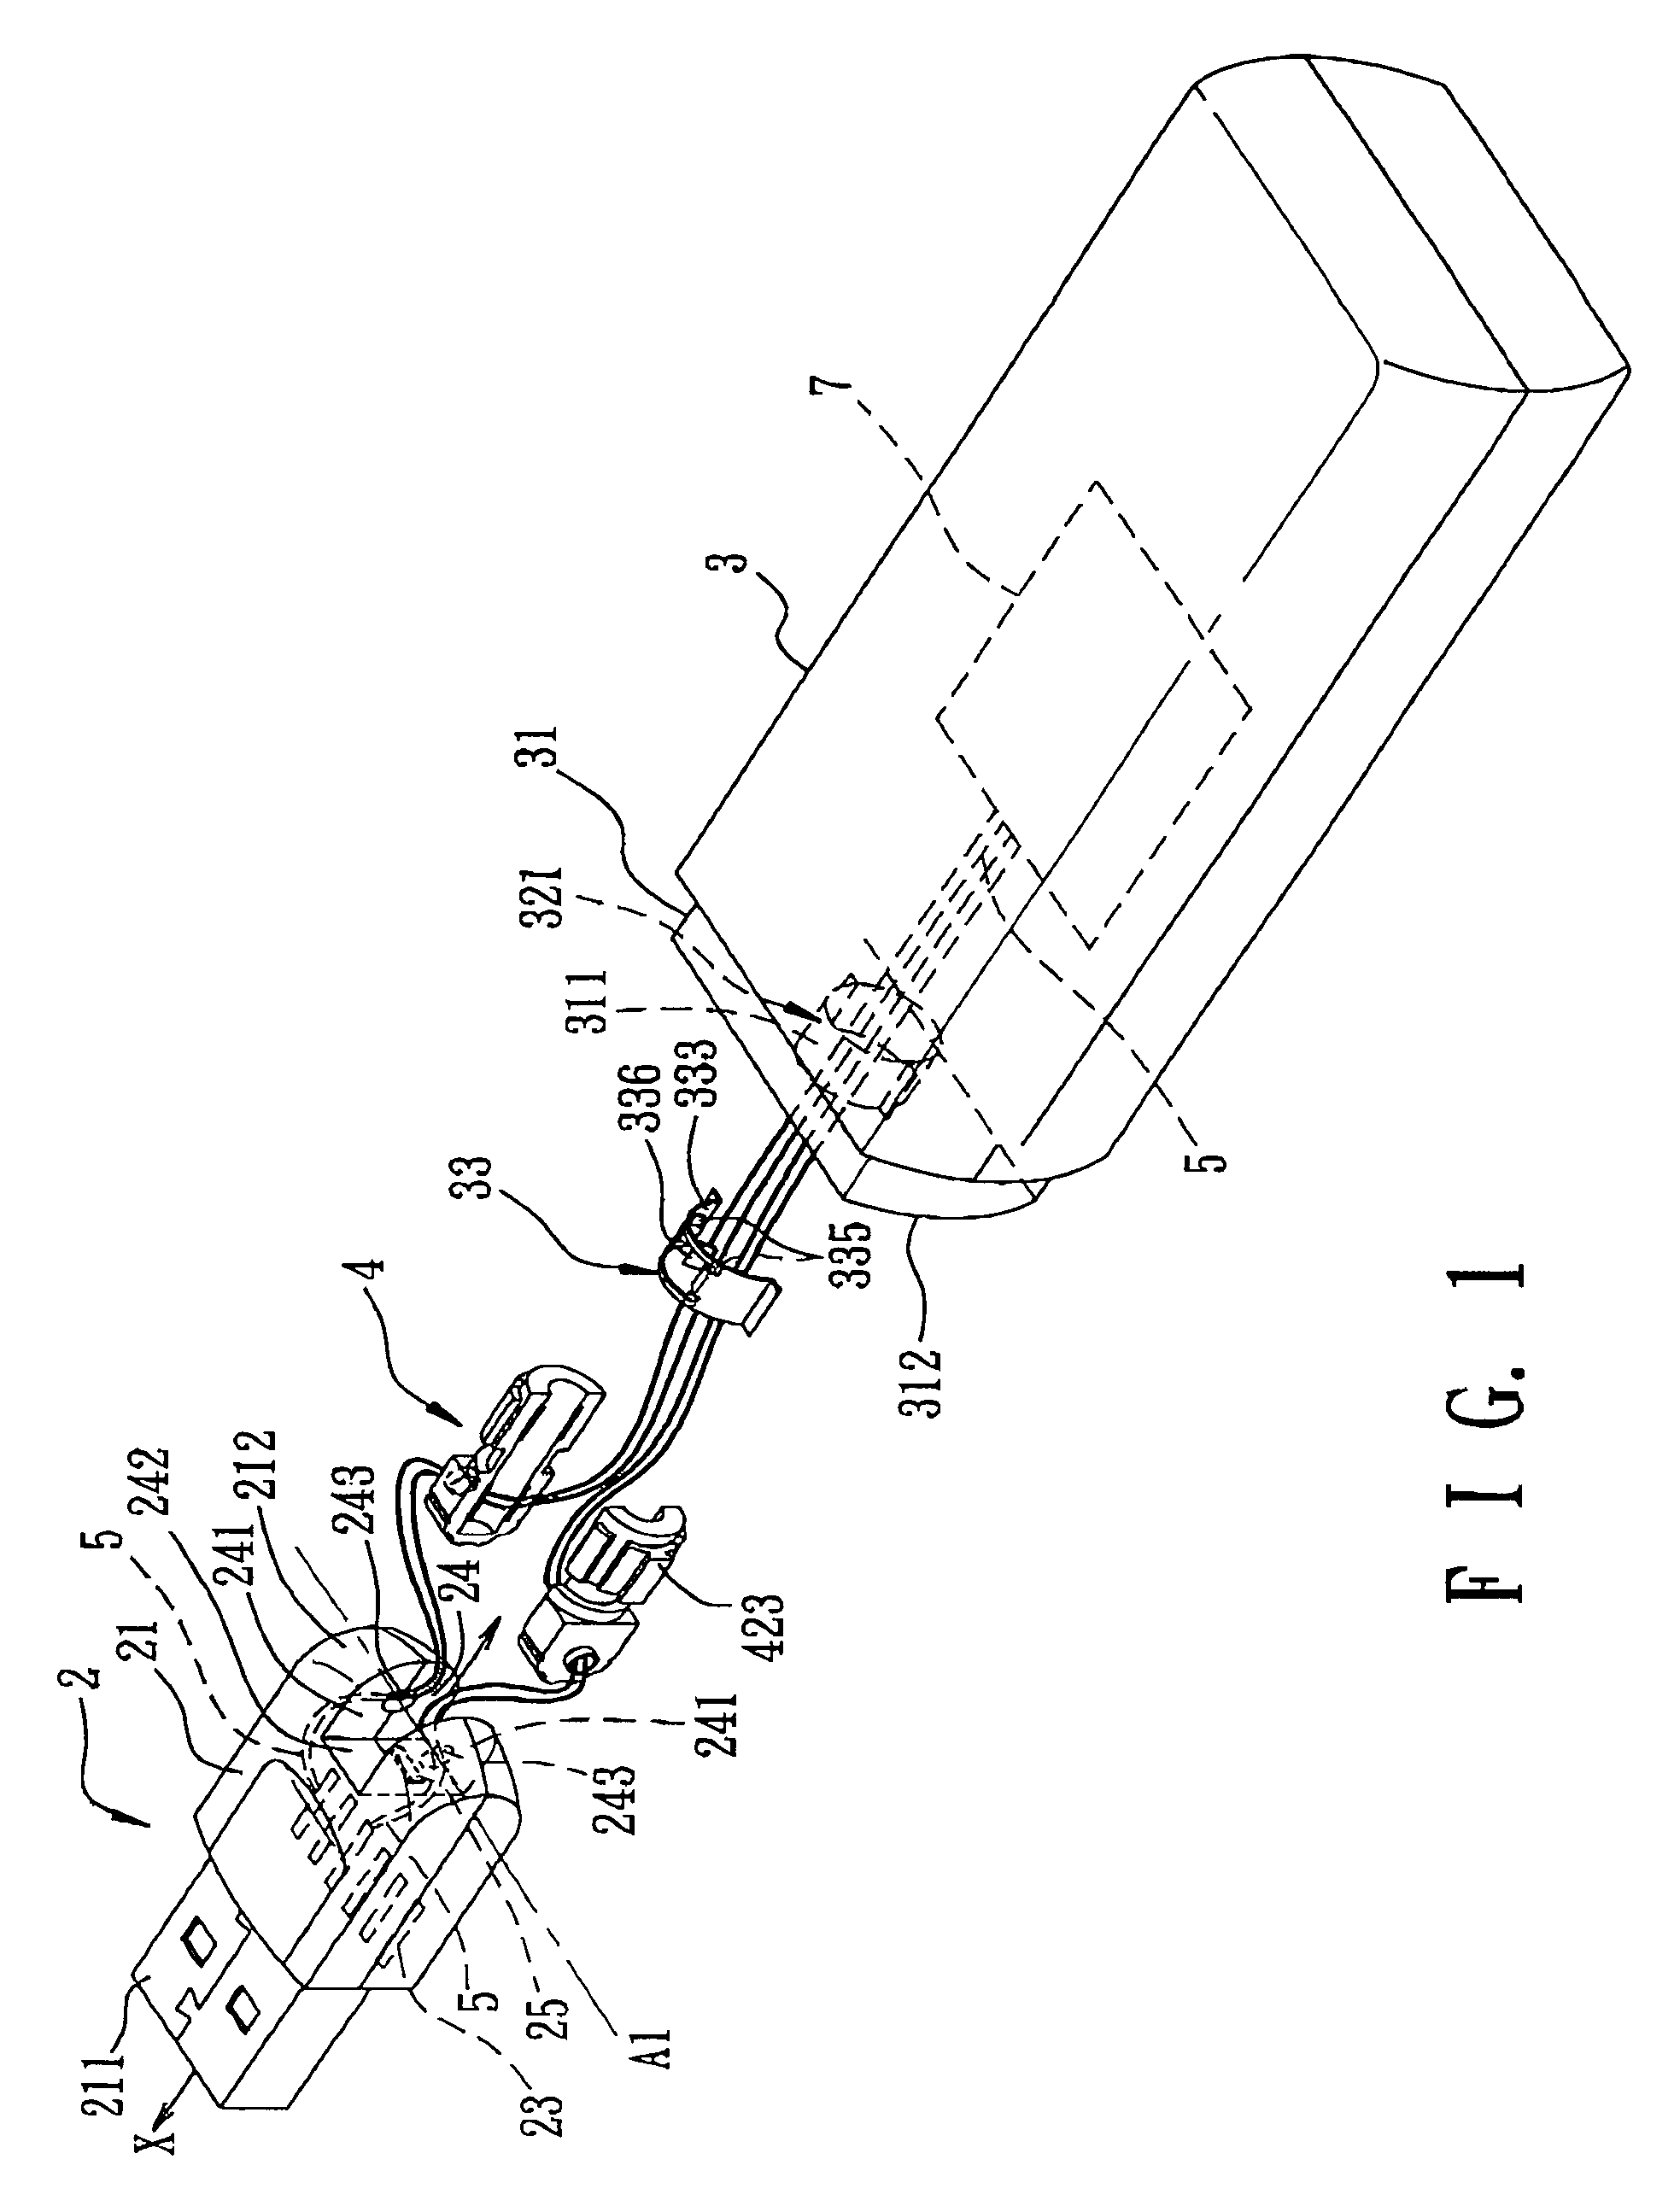 Electronic device having a pivotable electrical connector, and electrical connector assembly